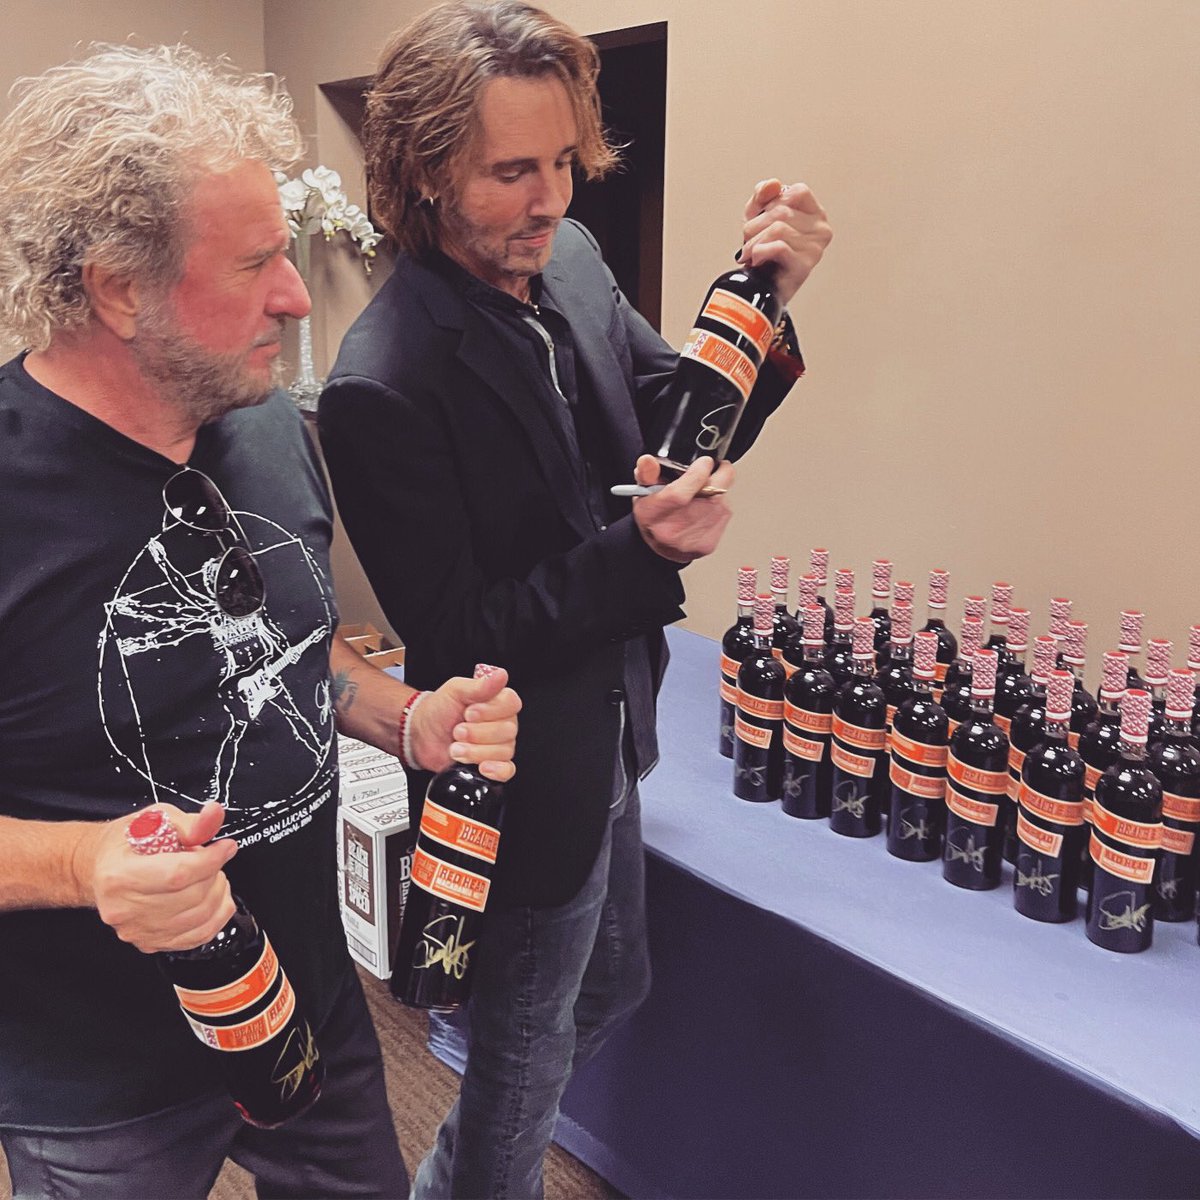 Me and my buddy/partner Sammy Hagar last night at his residency at the Strat in Vegas. Giving Beach Bar Rum some love and then rocking the house together in the show room. So much fun! @sammyhagar @sammysrum #BeachBarRum